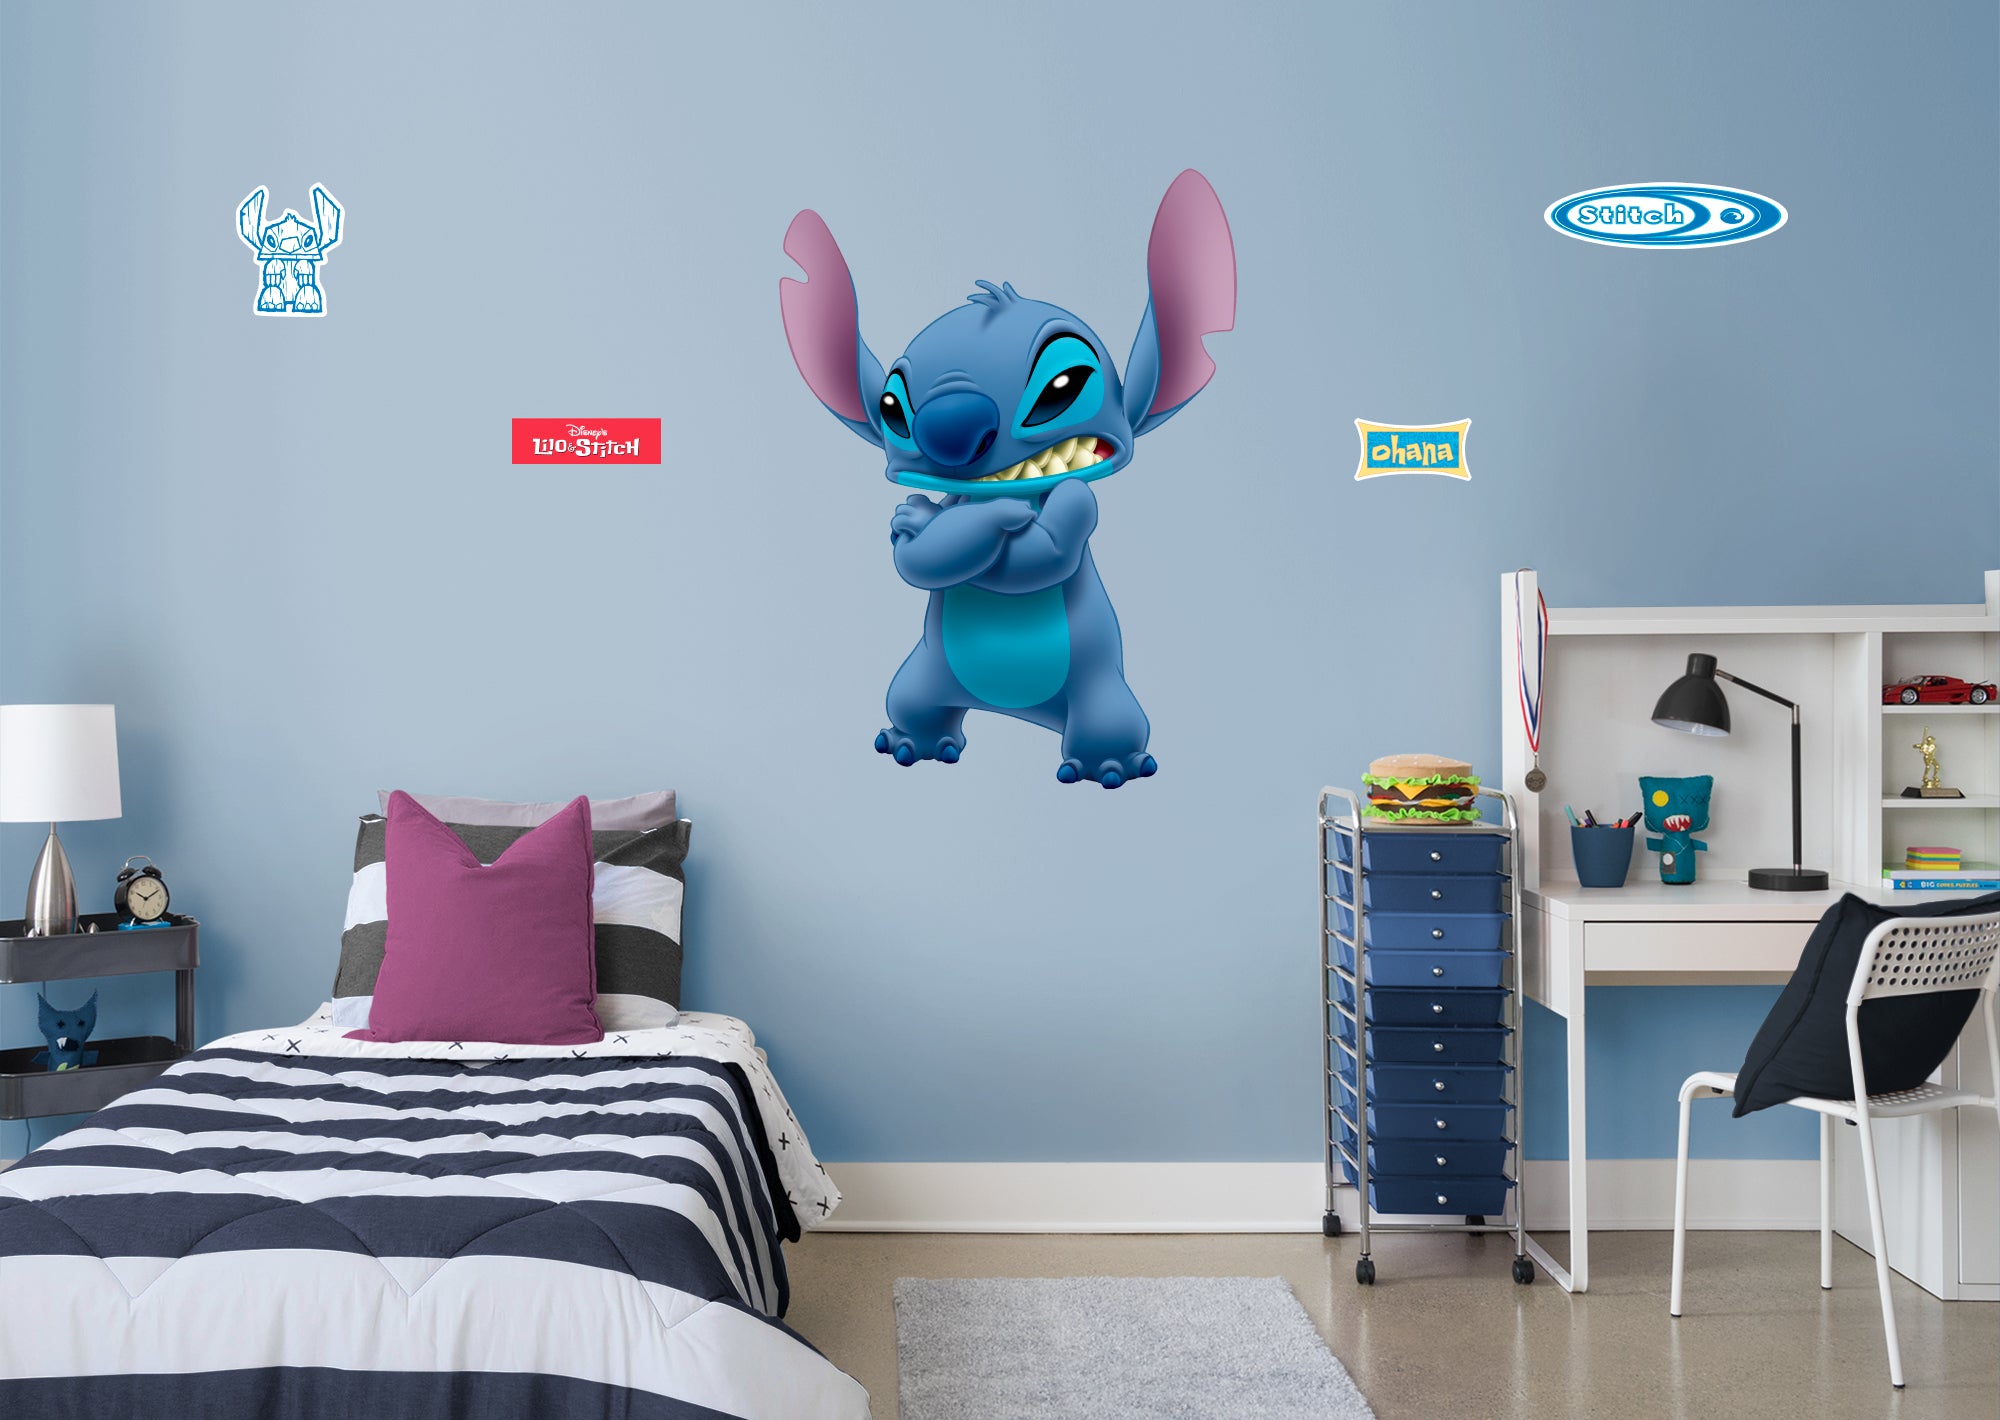 Lilo & Stitch: Lilo RealBig - Disney Removable Adhesive Wall Decal Giant Character +4 Wall Decals 33W x 50H